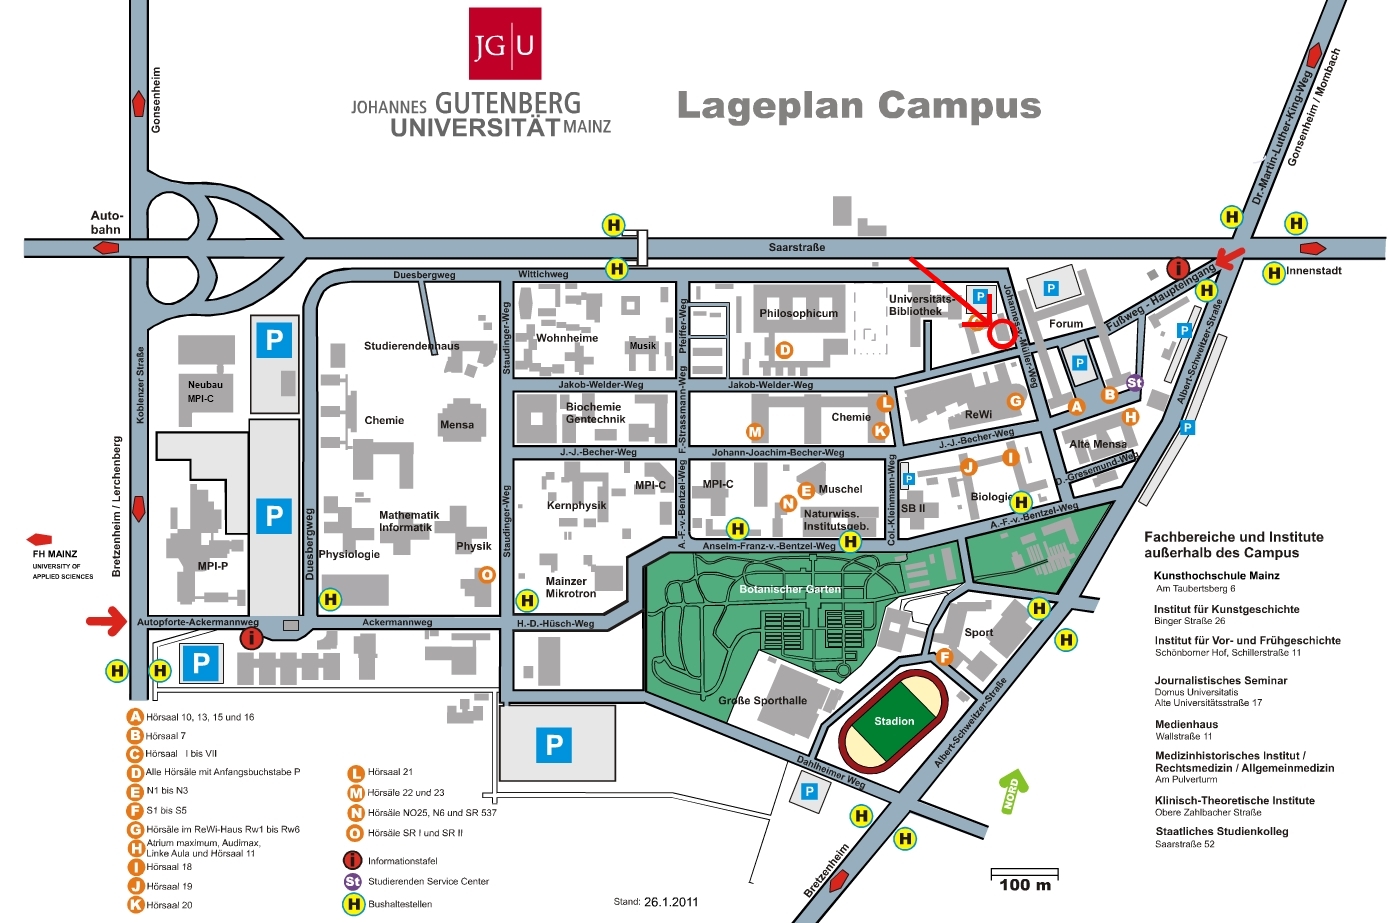 Plano East Campus Map